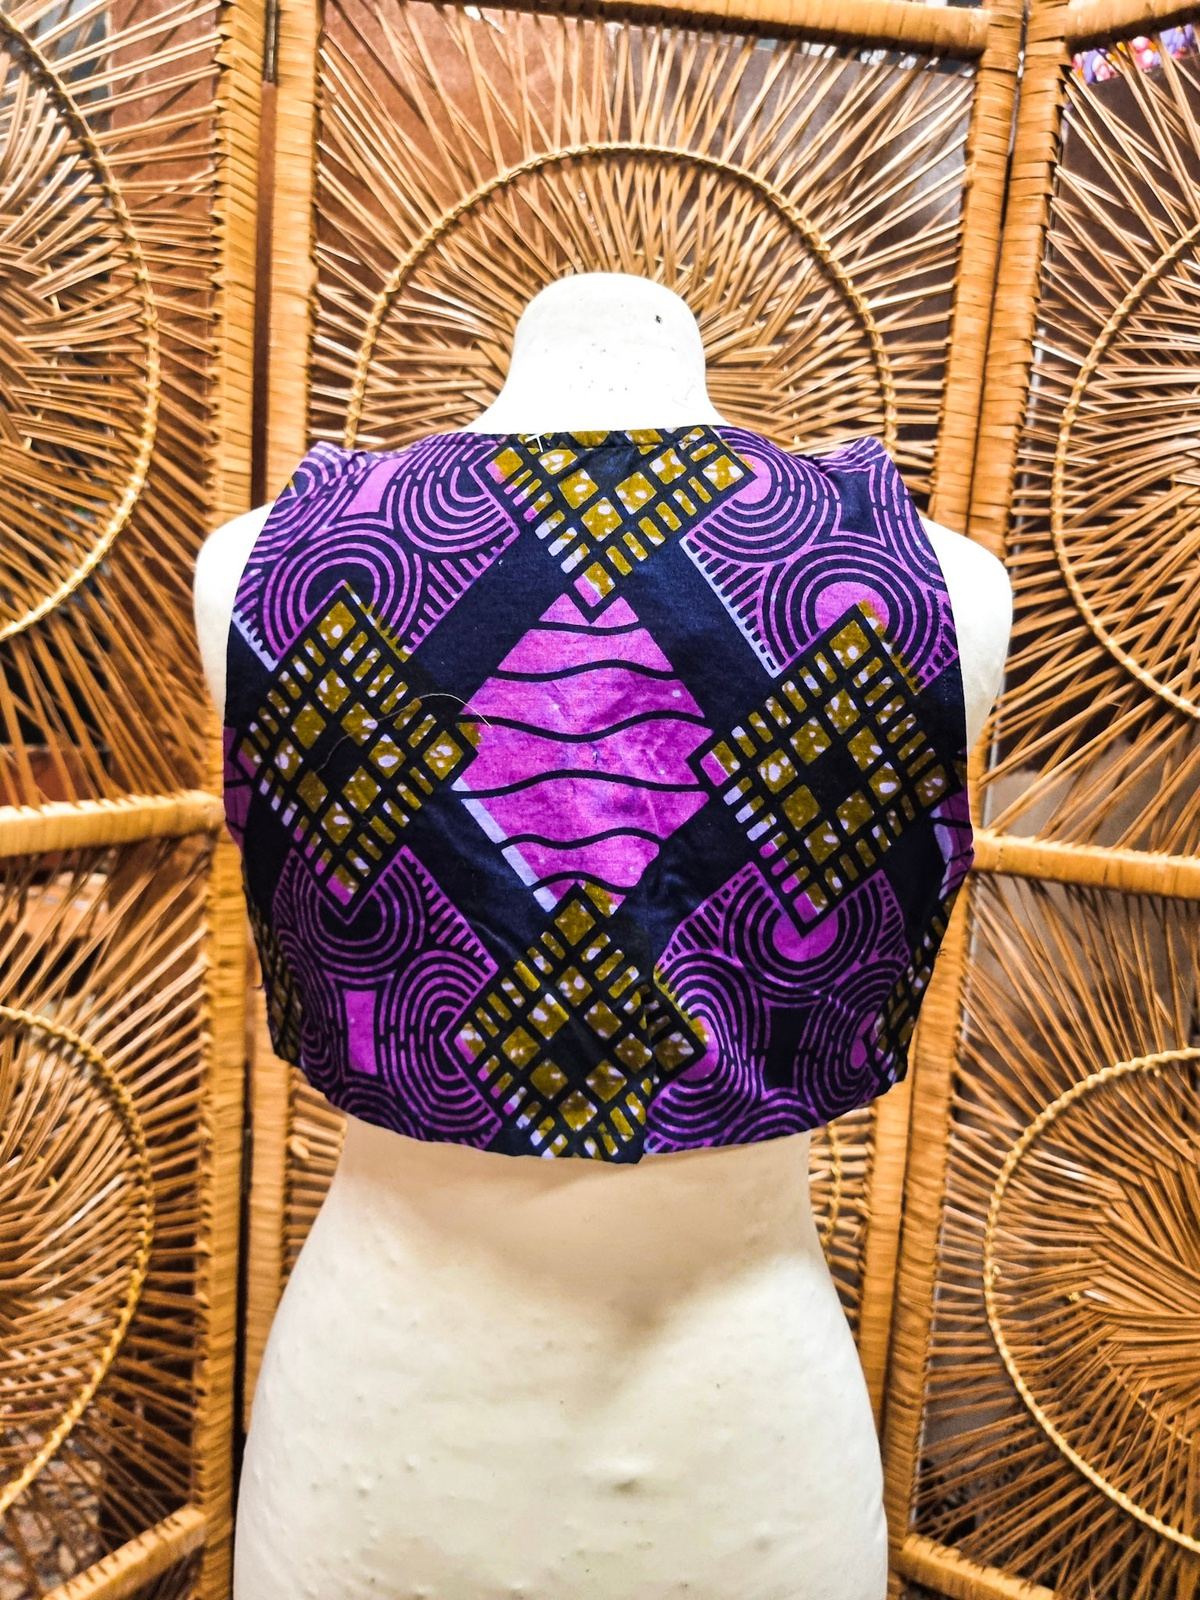 Brand New M.I.A Made in Africa Crop Gillet